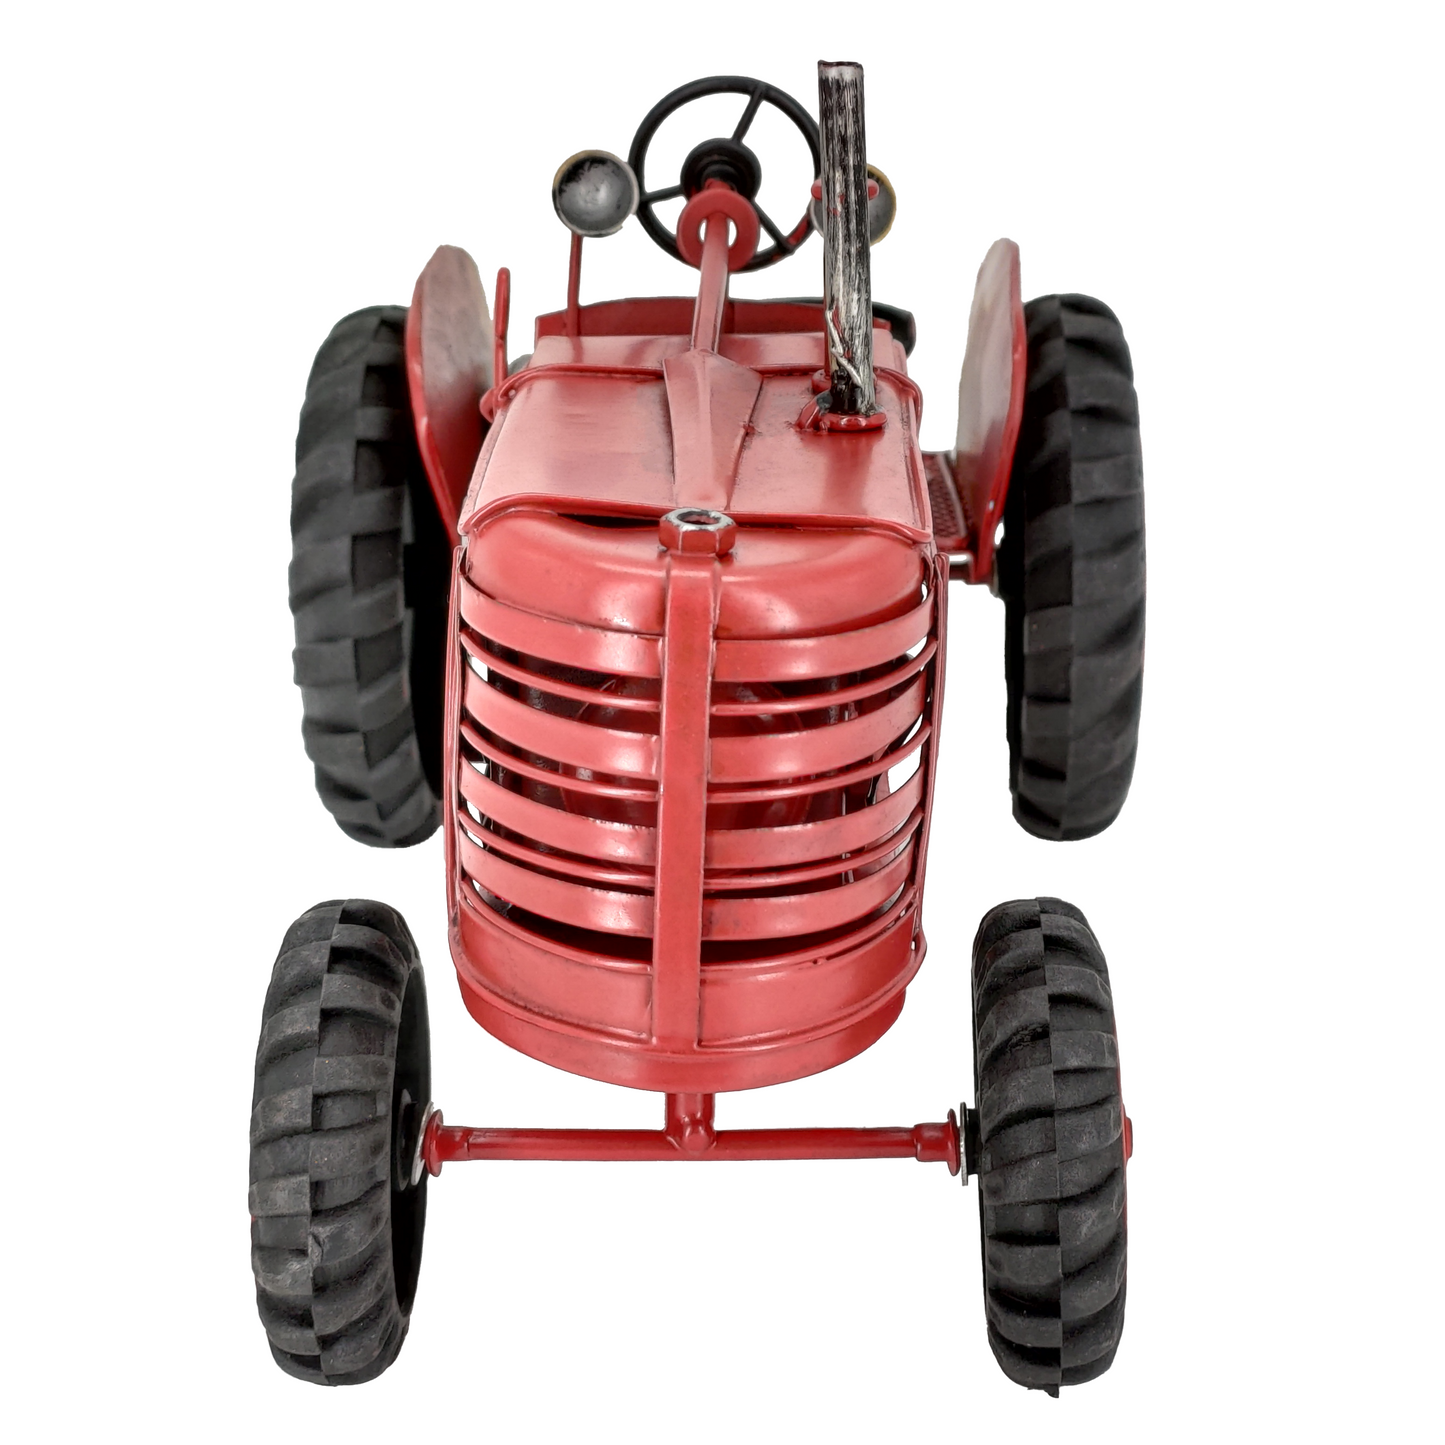 VINTAGE RED TRACTOR DIECAST MODEL